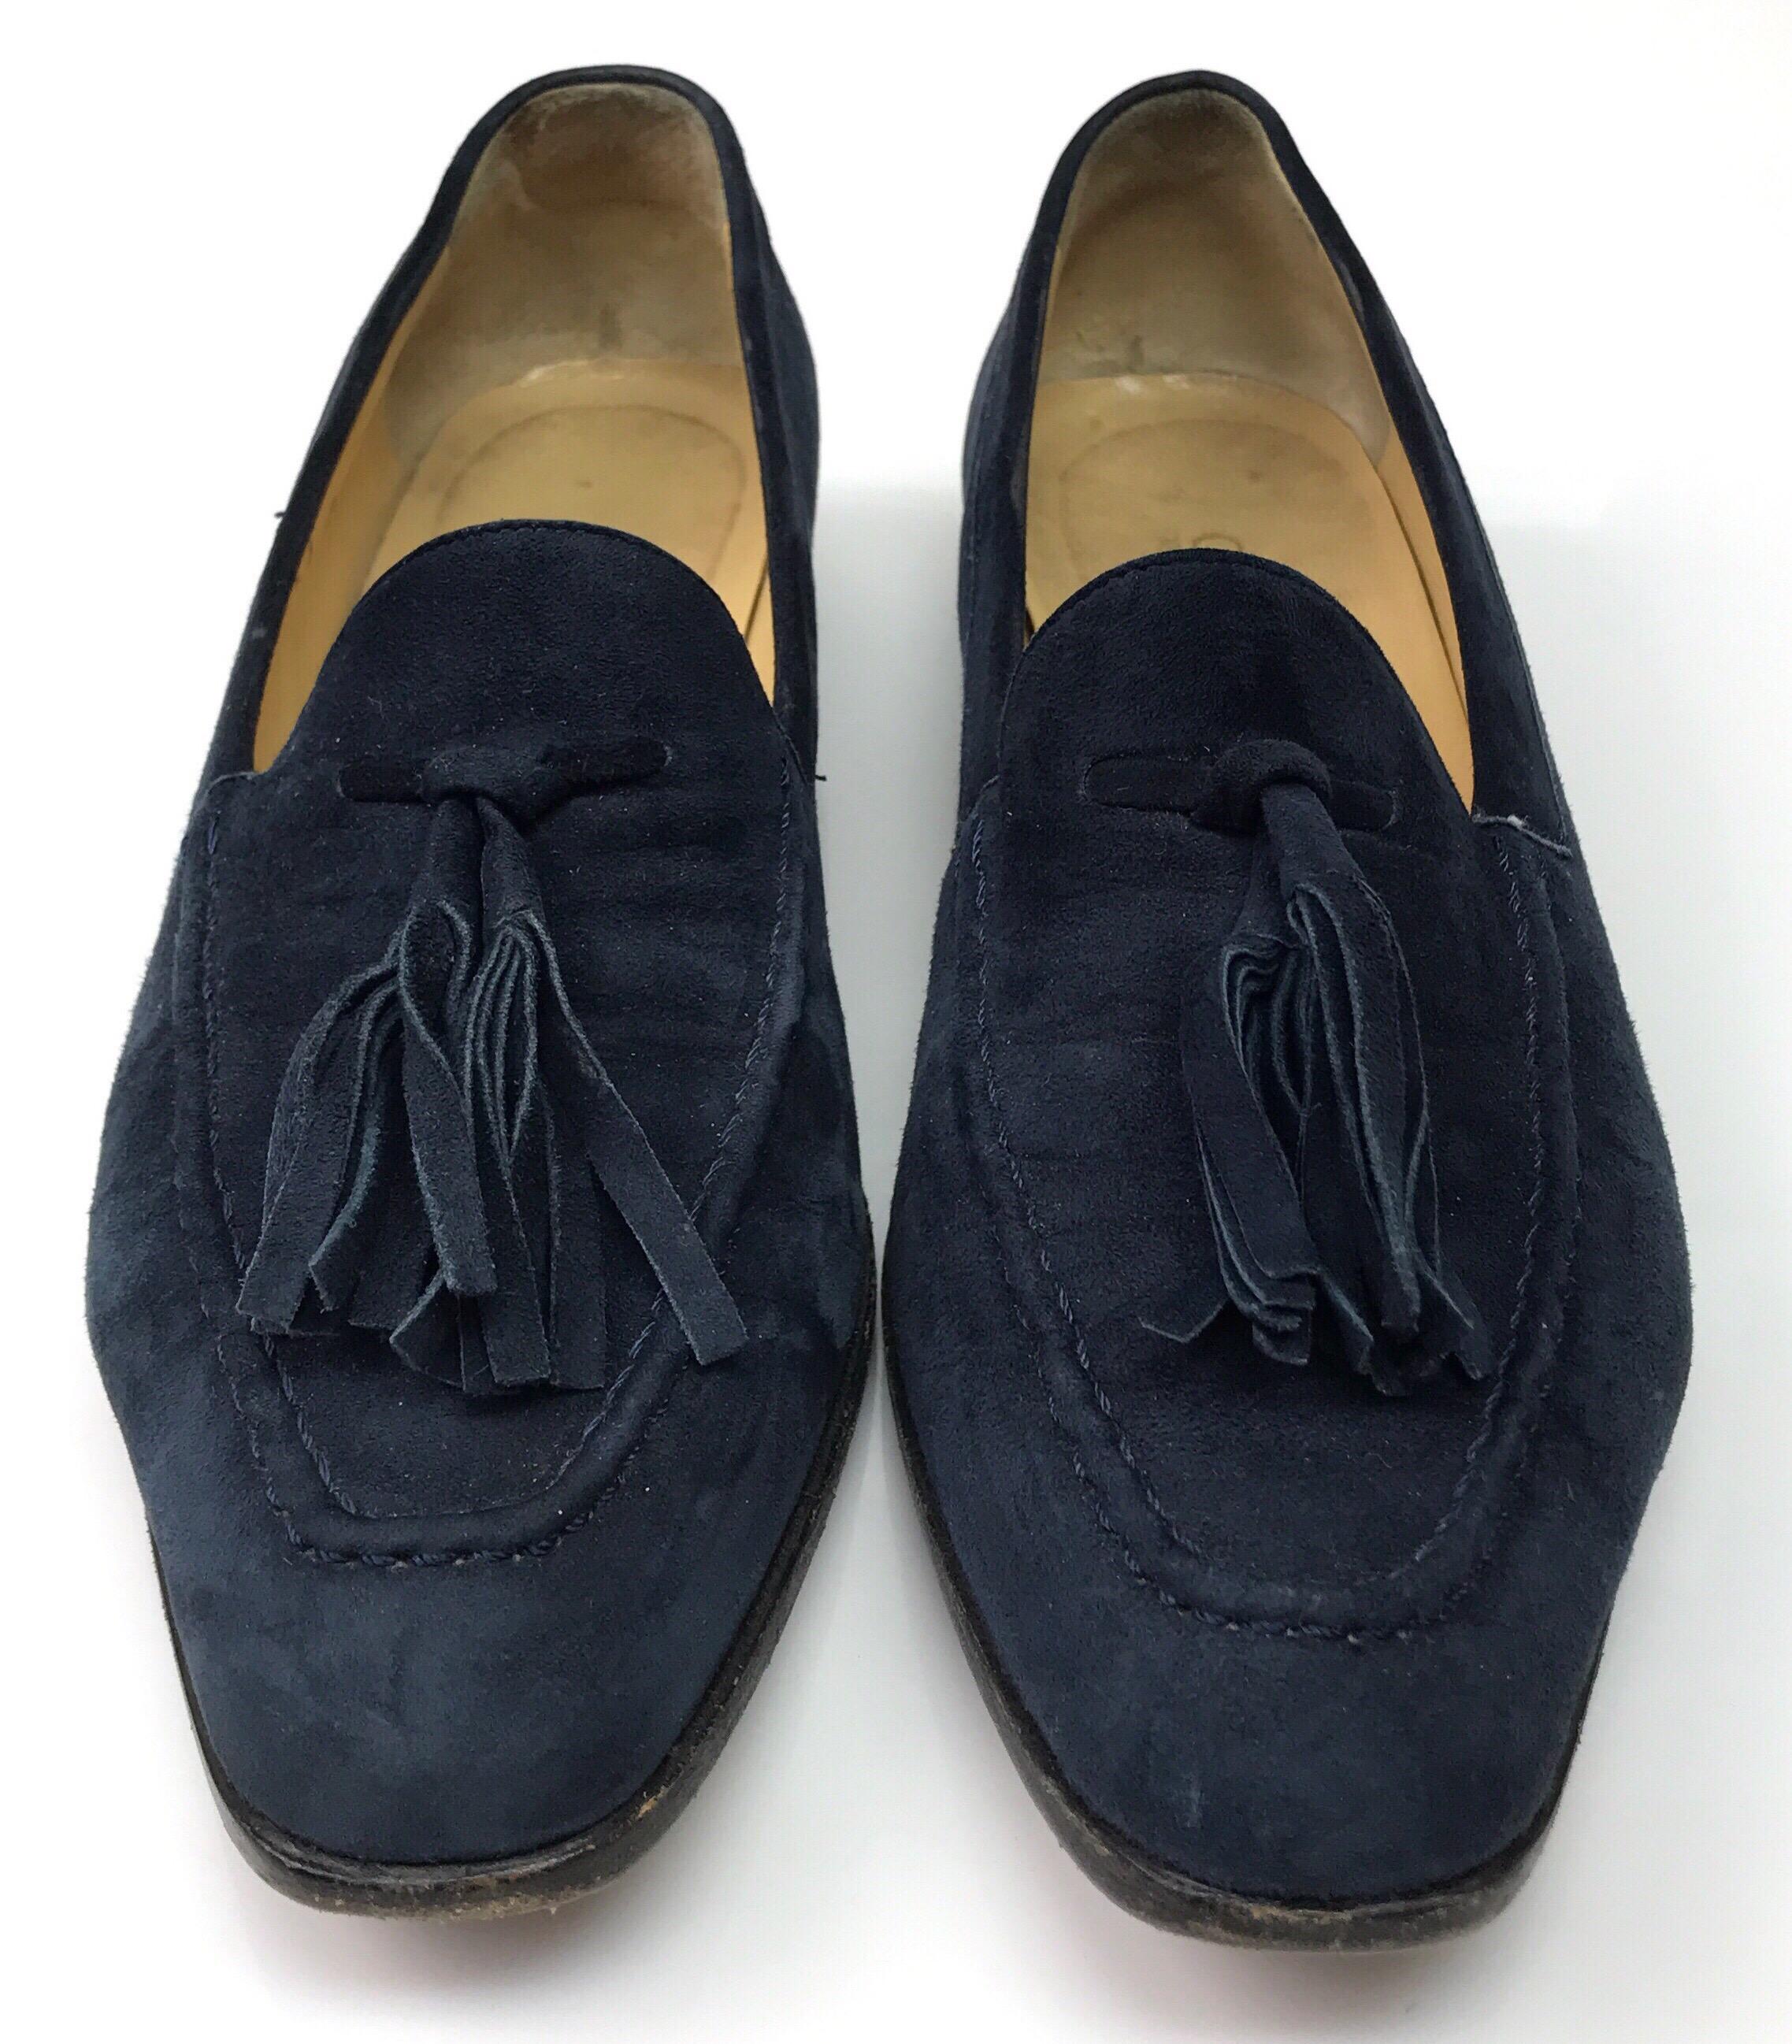 Gucci Navy Suede Tassel Loafer - 6. These amazing Gucci loafers are in good condition. They are have some signs of use, including small stains on the inside and outside, and the bottoms being rubbed off. They are made of navy suede and have tassels